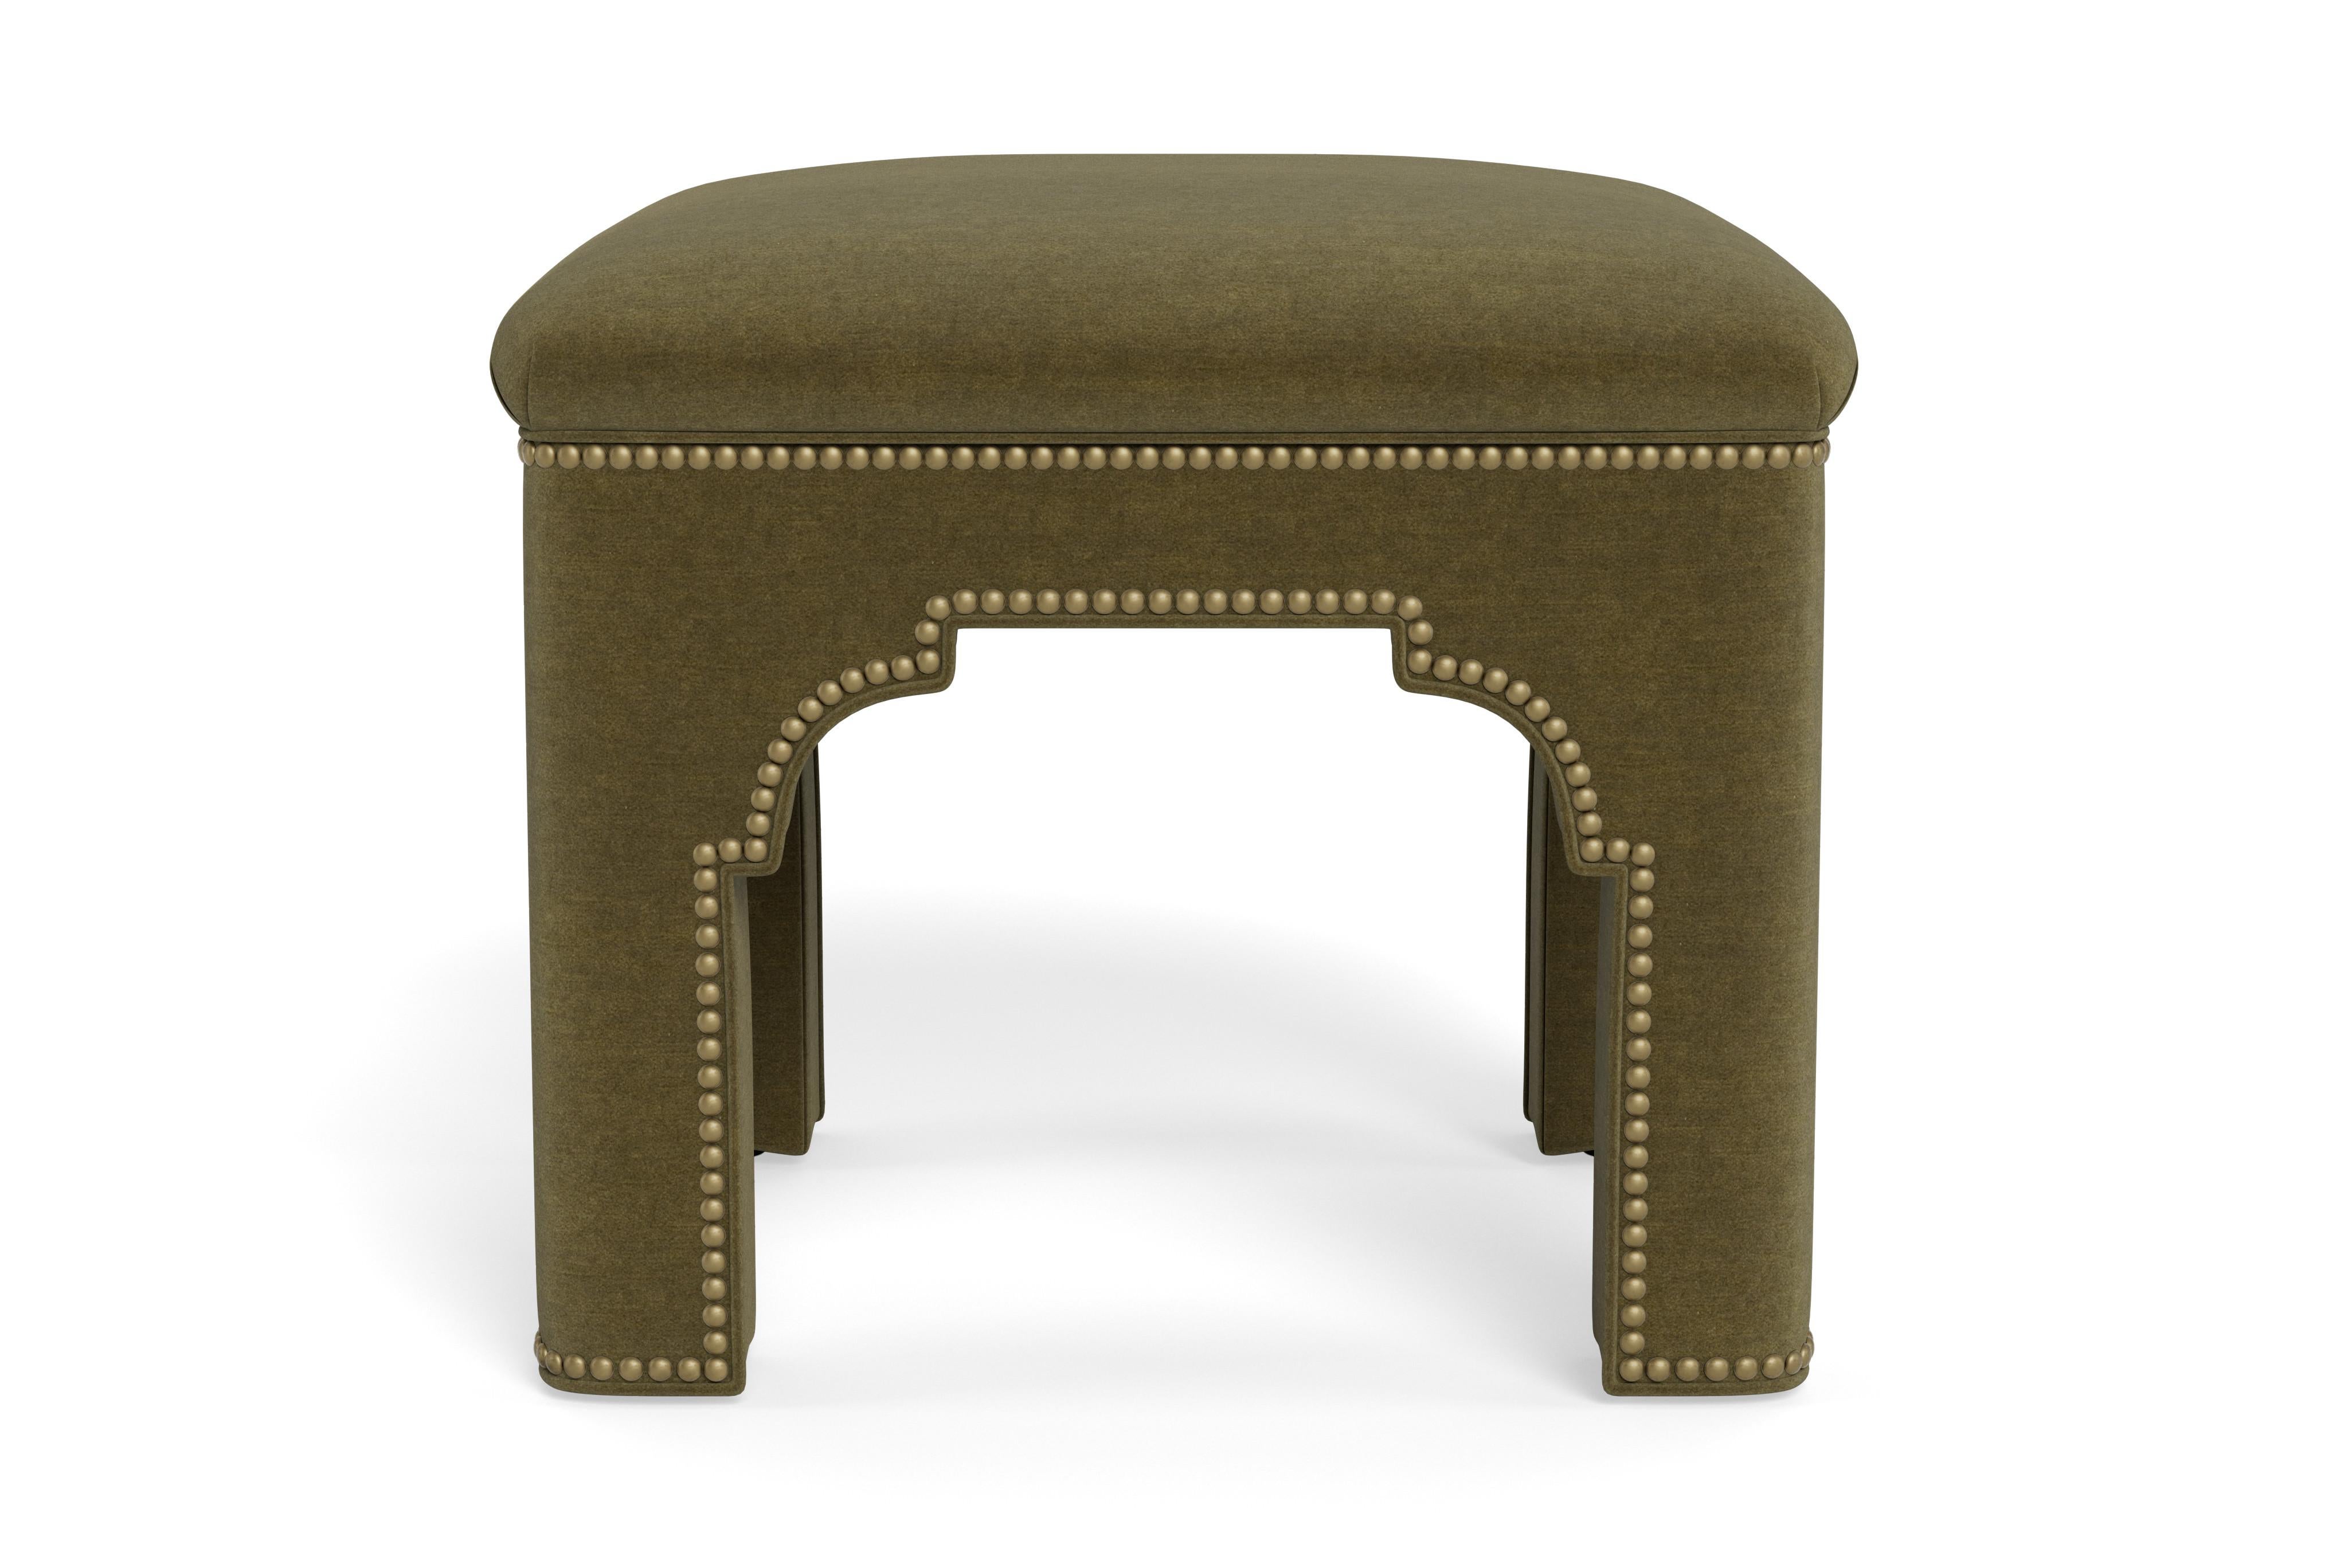 Add a chic accent to any room with this compact stool on its own or displayed in pairs.  Made to order with antique brass nail heads accenting moss performance velvet, a fabric that can be cleaned and withstand high traffic areas. The tightly